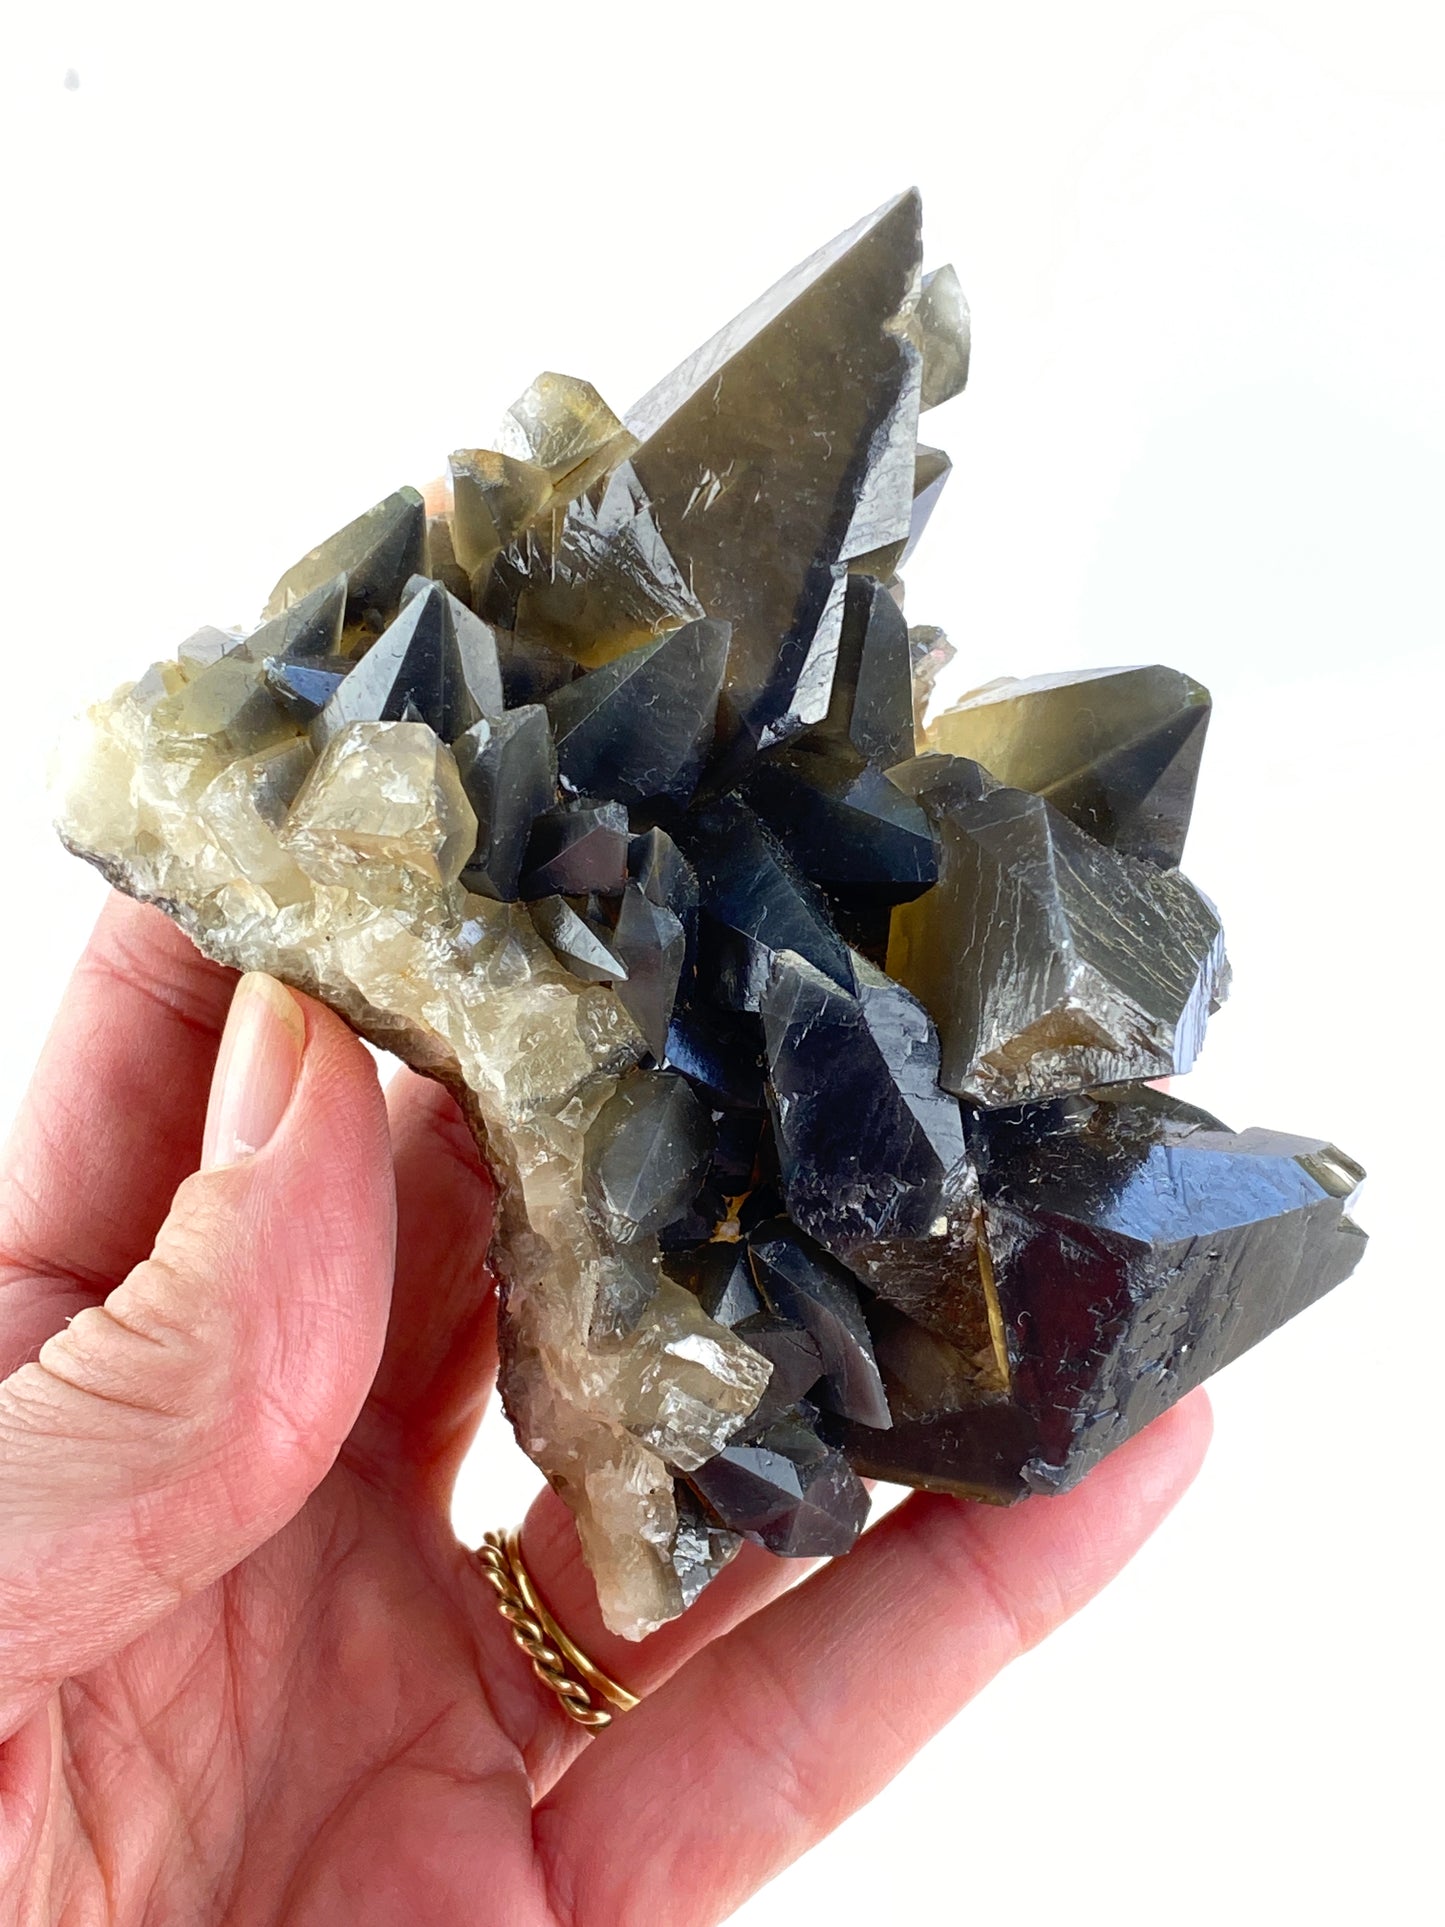 Dog tooth calcite crystal, Stellar Beam Calcite crystal, Rare form of calcite, Manifestation, Higher knowledge